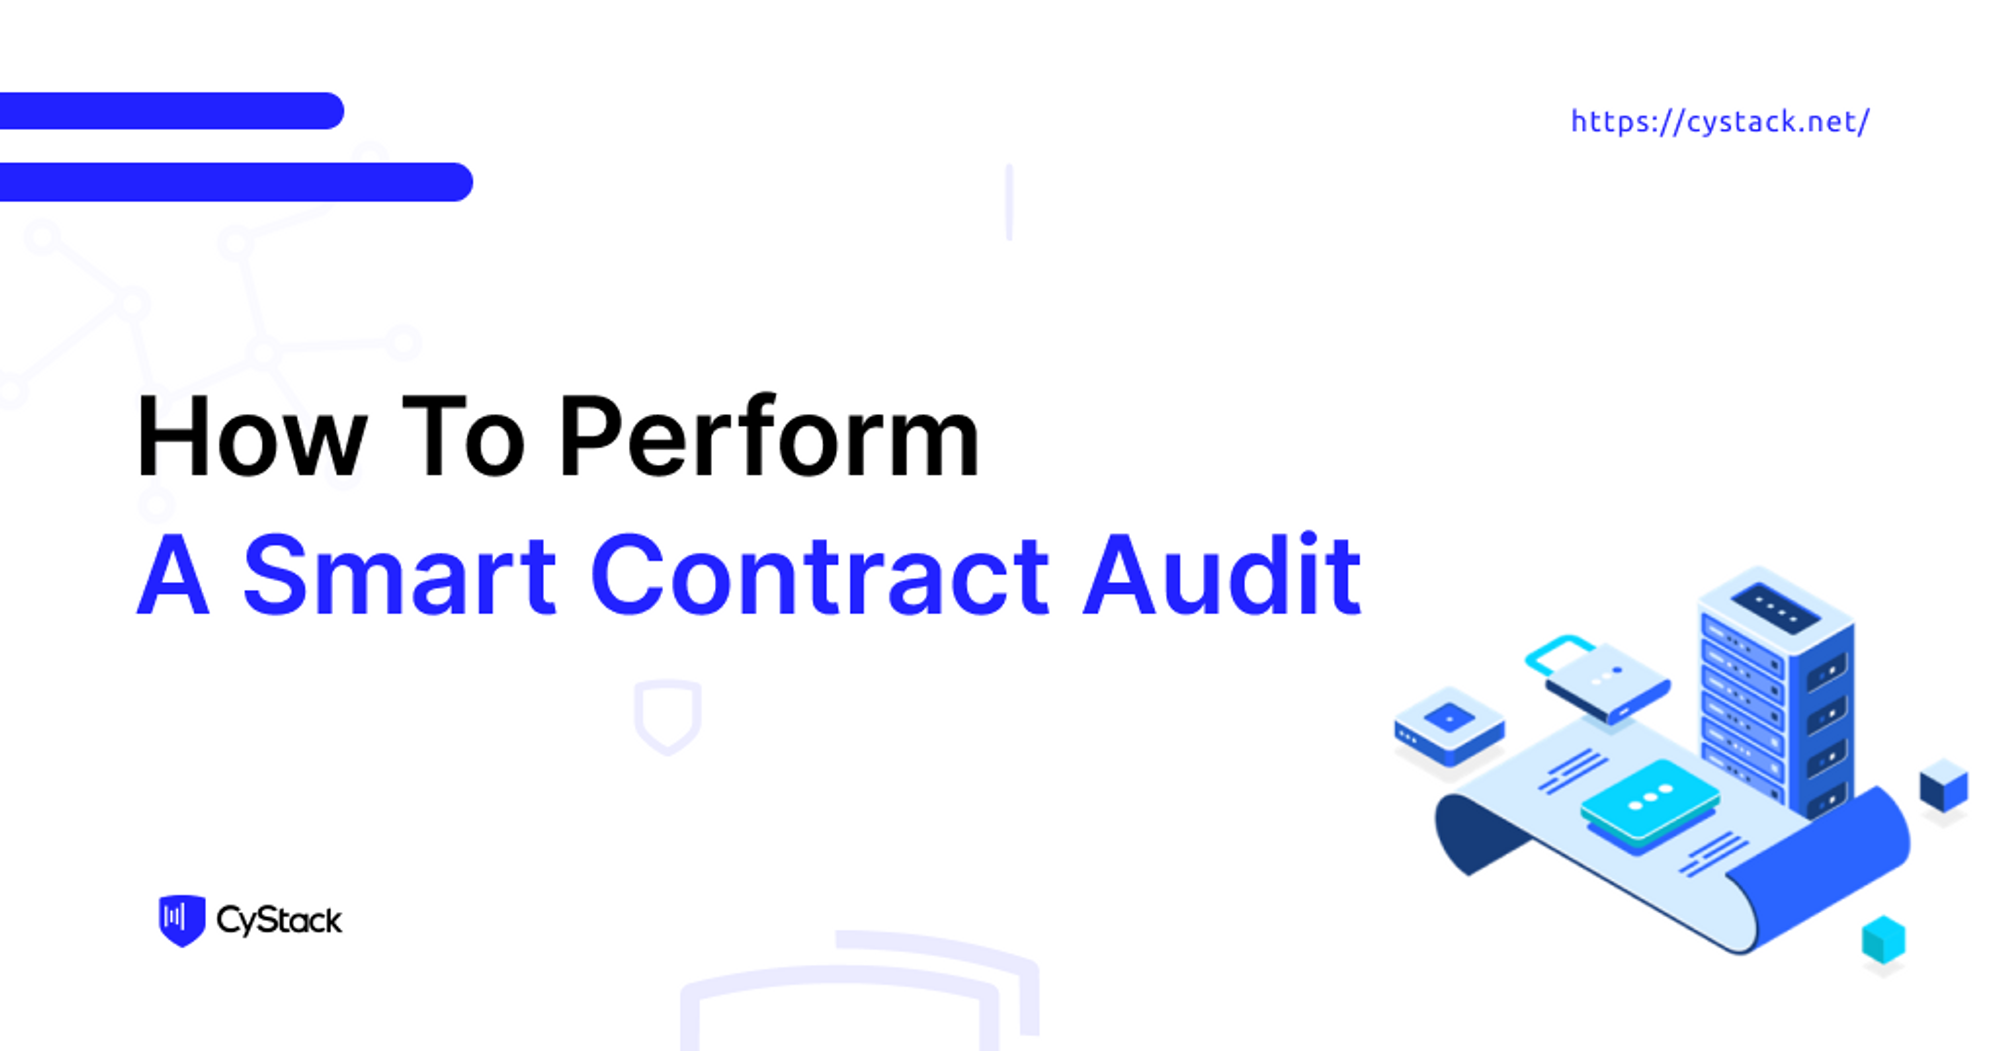 How To Perform A Smart Contract Audit